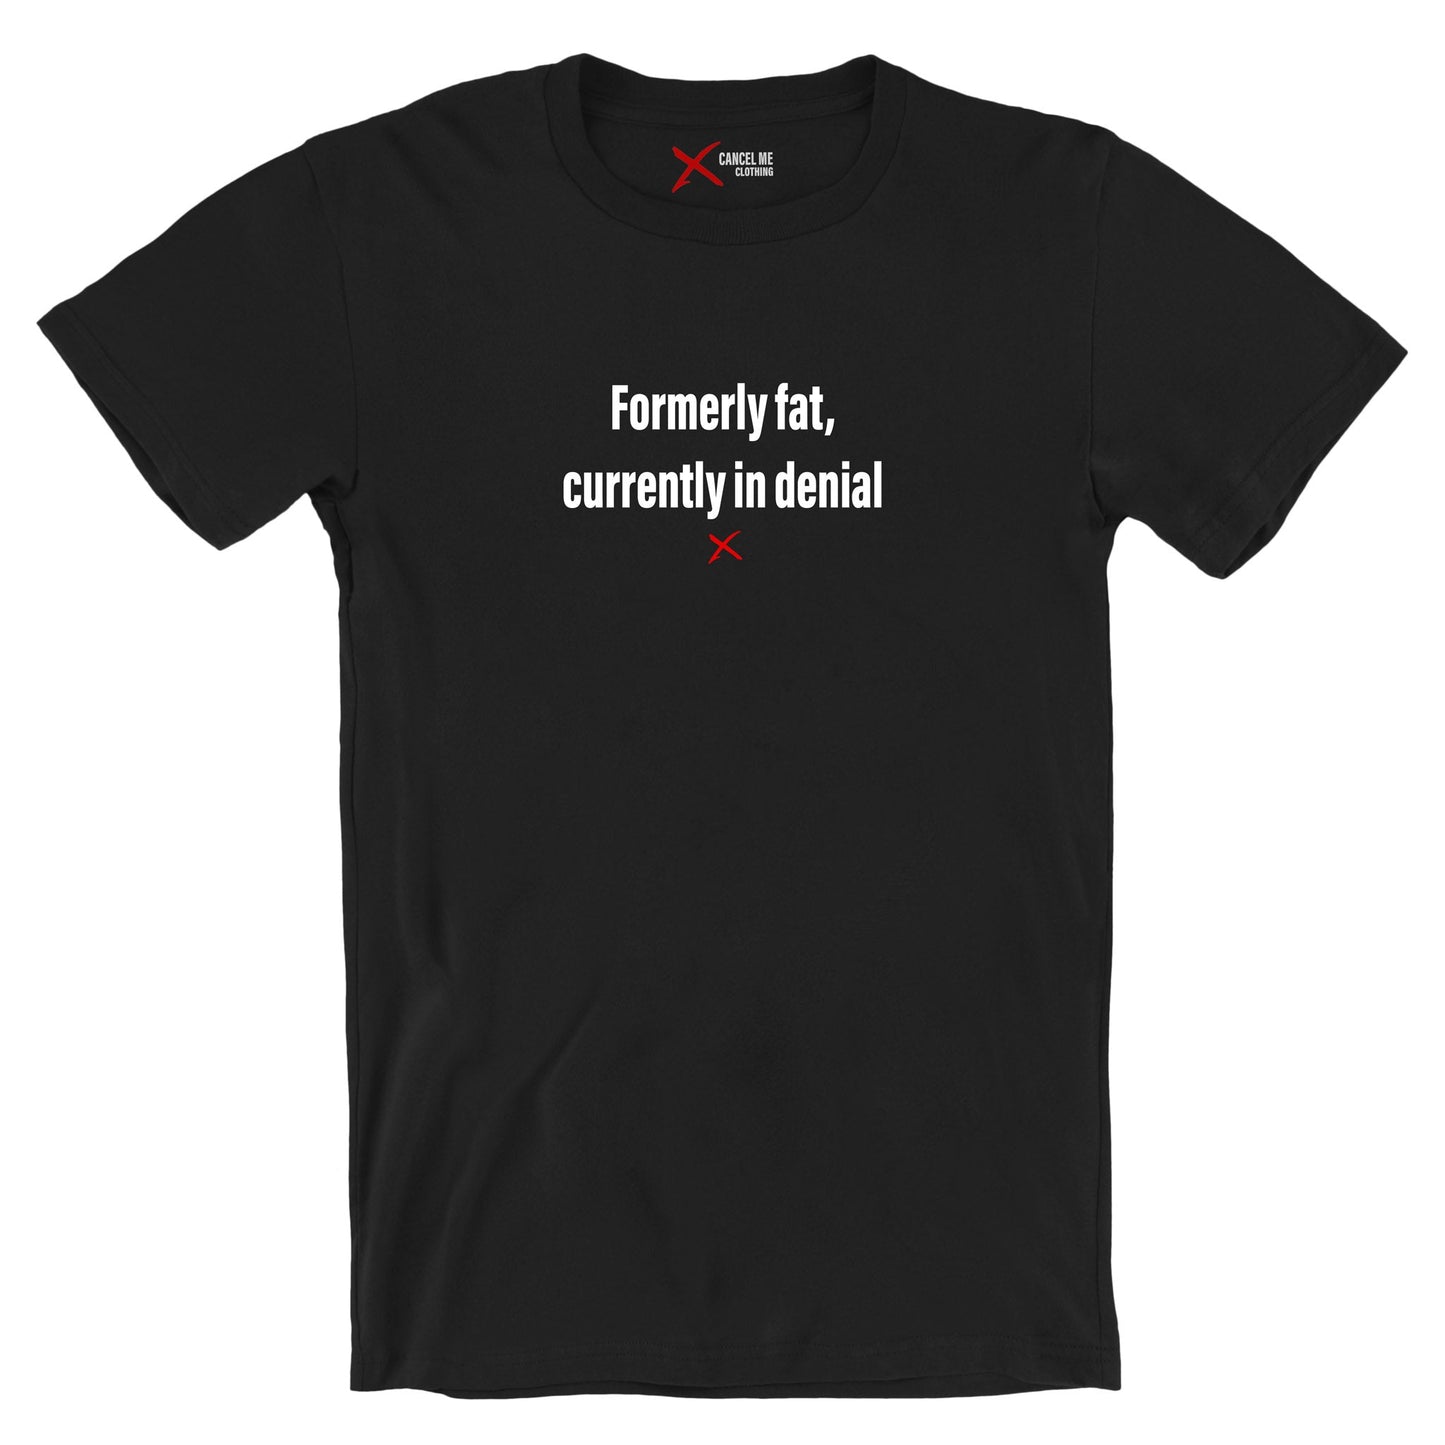 Formerly fat, currently in denial - Shirt